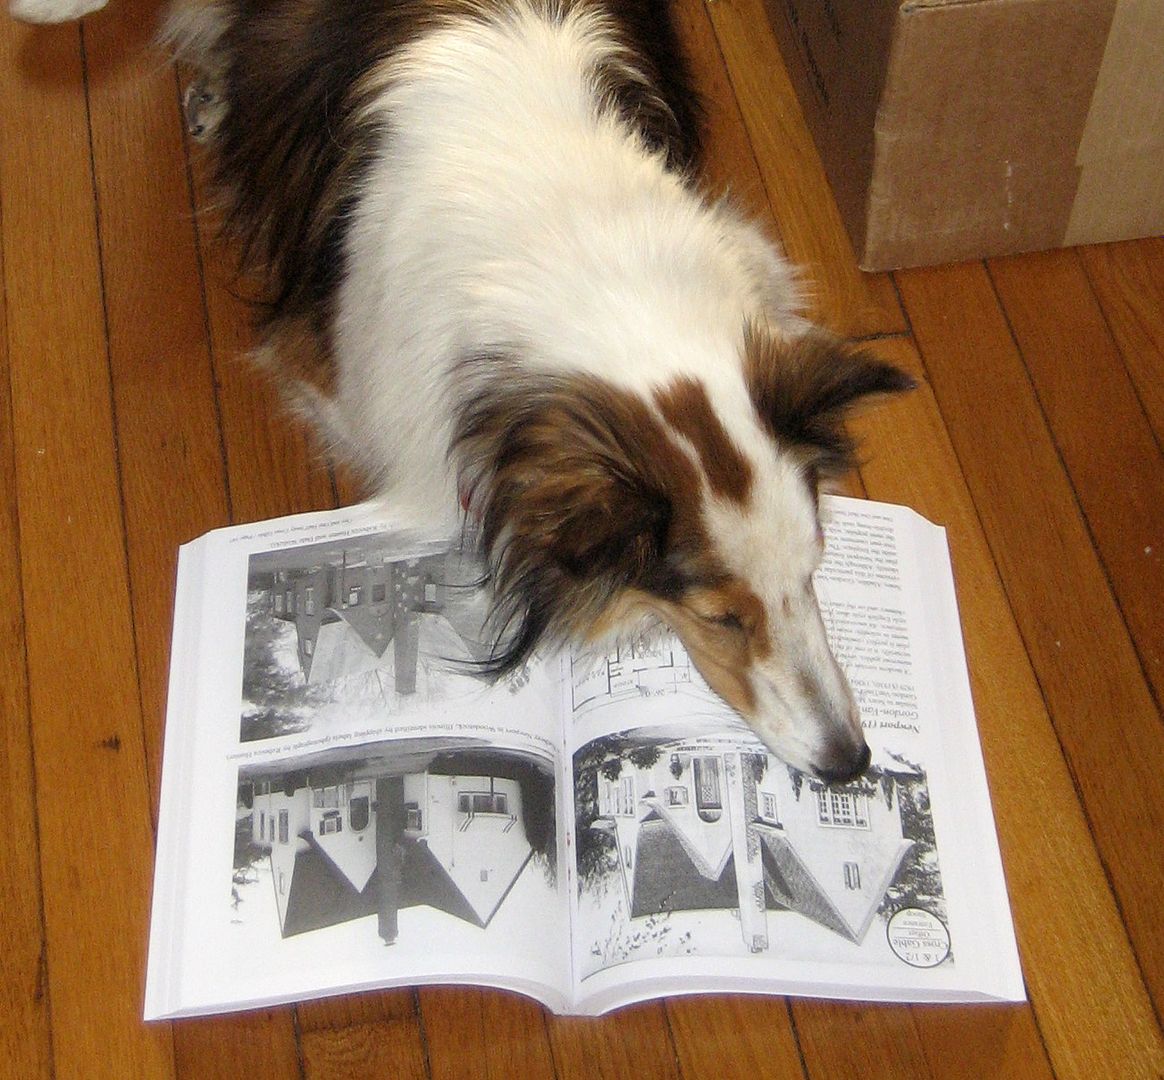 Teddy loves learning about kit homes. She spends much of her spare time reading The Mail-Order Homes of Montgomery Ward, and she can be a great help when were out hunting for kit homes.